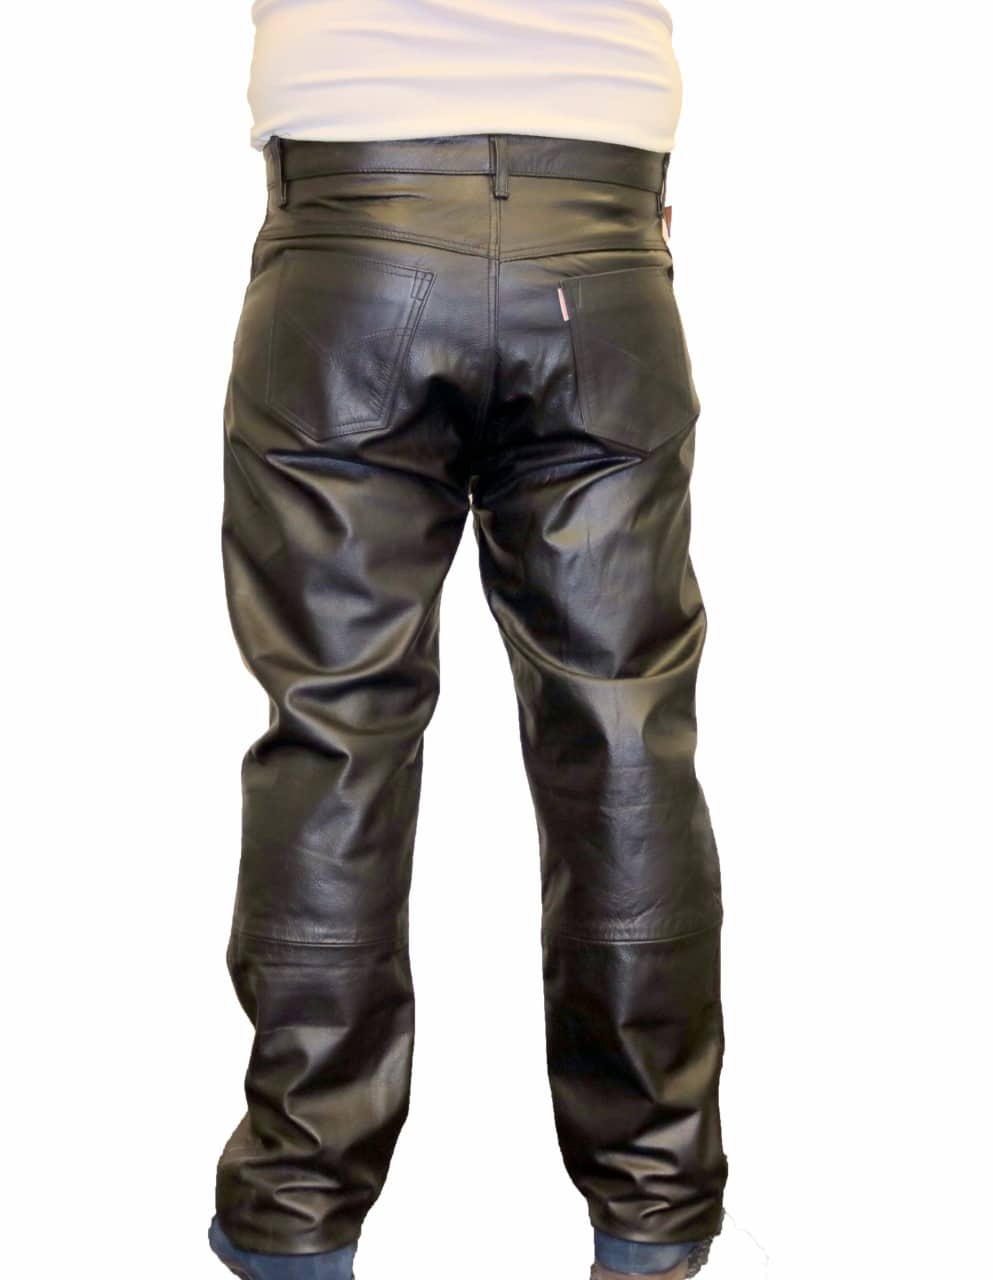 Leather Pants for Men and Women - Motorcycle Leather Pants